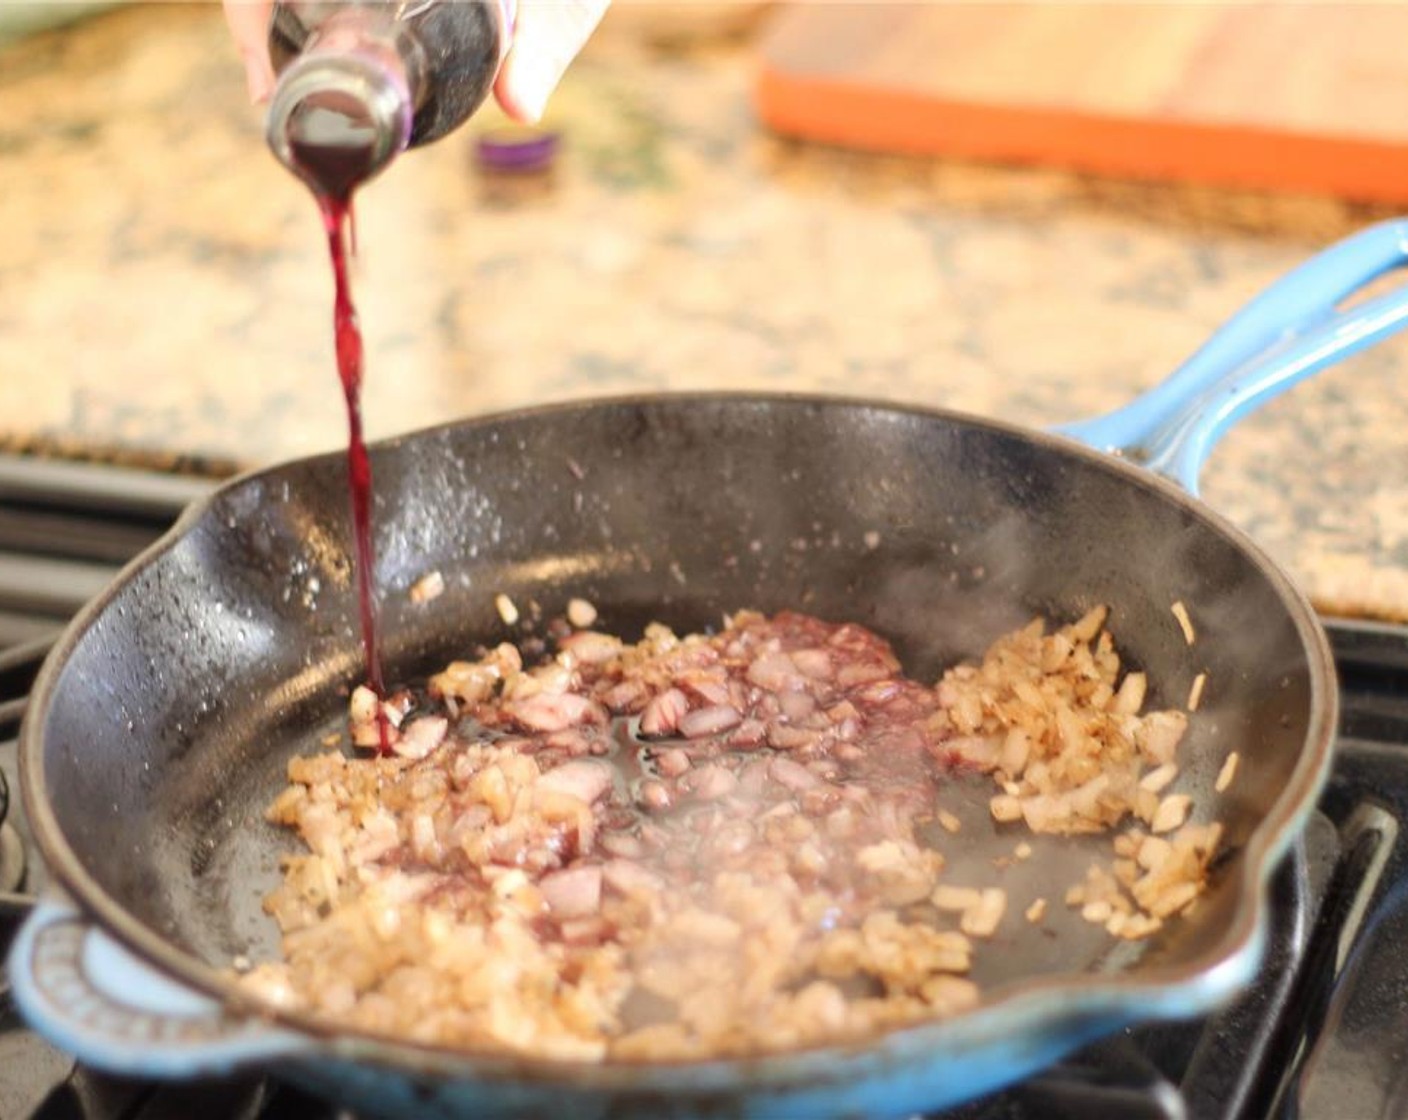 step 4 Add Shallots (2) to pan and sauté until translucent. Add Dry Red Wine (1/2 cup) to deglaze, turn heat to high, and reduce by 1/2.